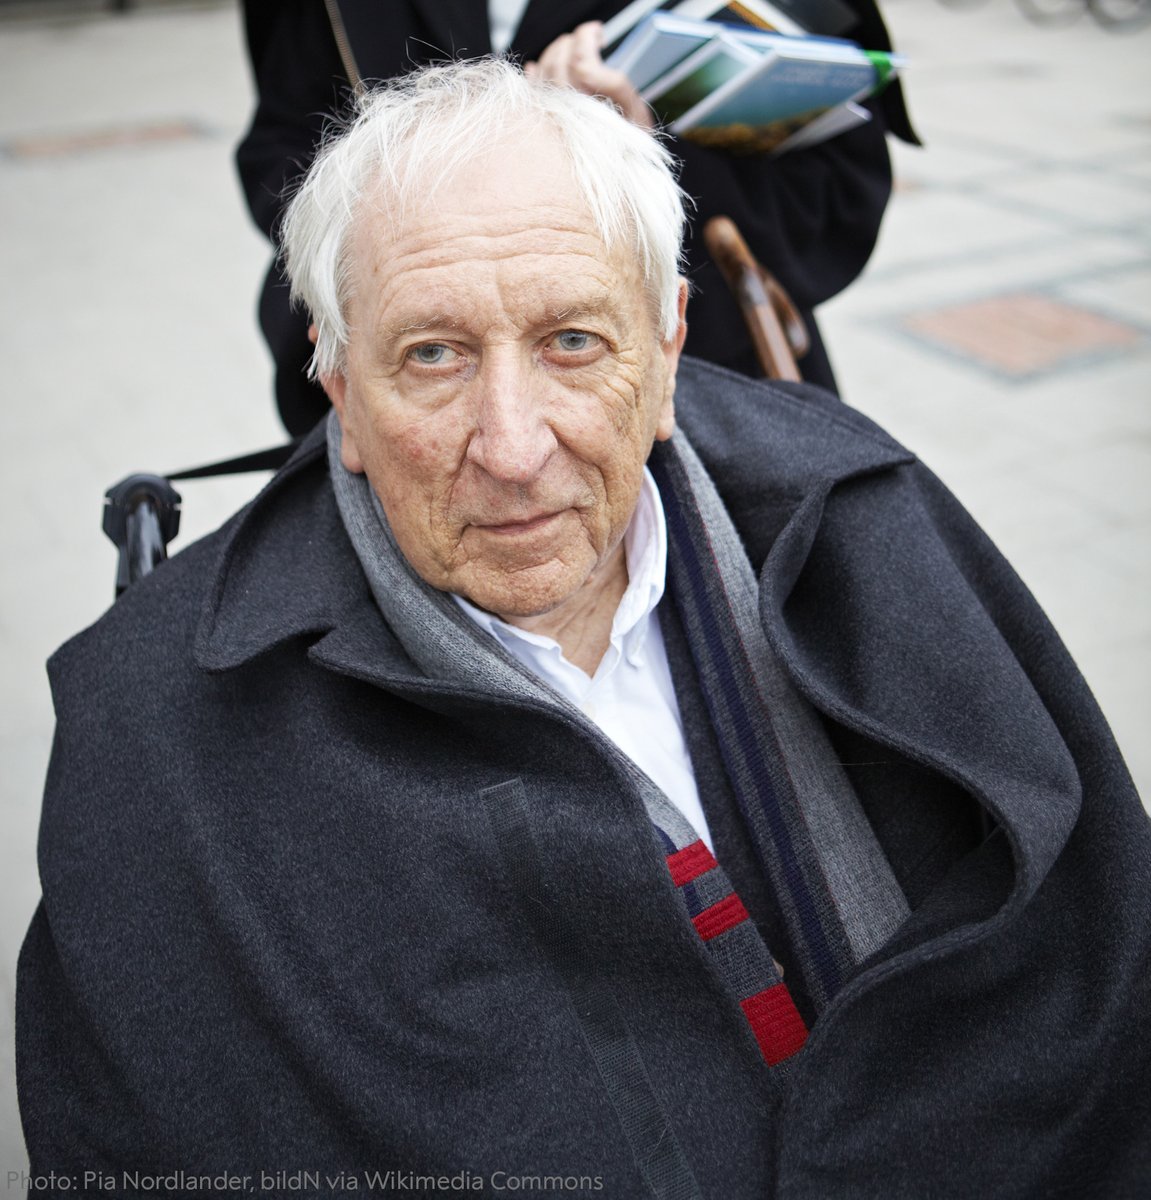 Remembering literature laureate and poet Tomas Tranströmer.  The year he turned 80 years old, he was awarded the 2011 #NobelPrize in Literature 'because, through his condensed, translucent images, he gives us fresh access to reality'.